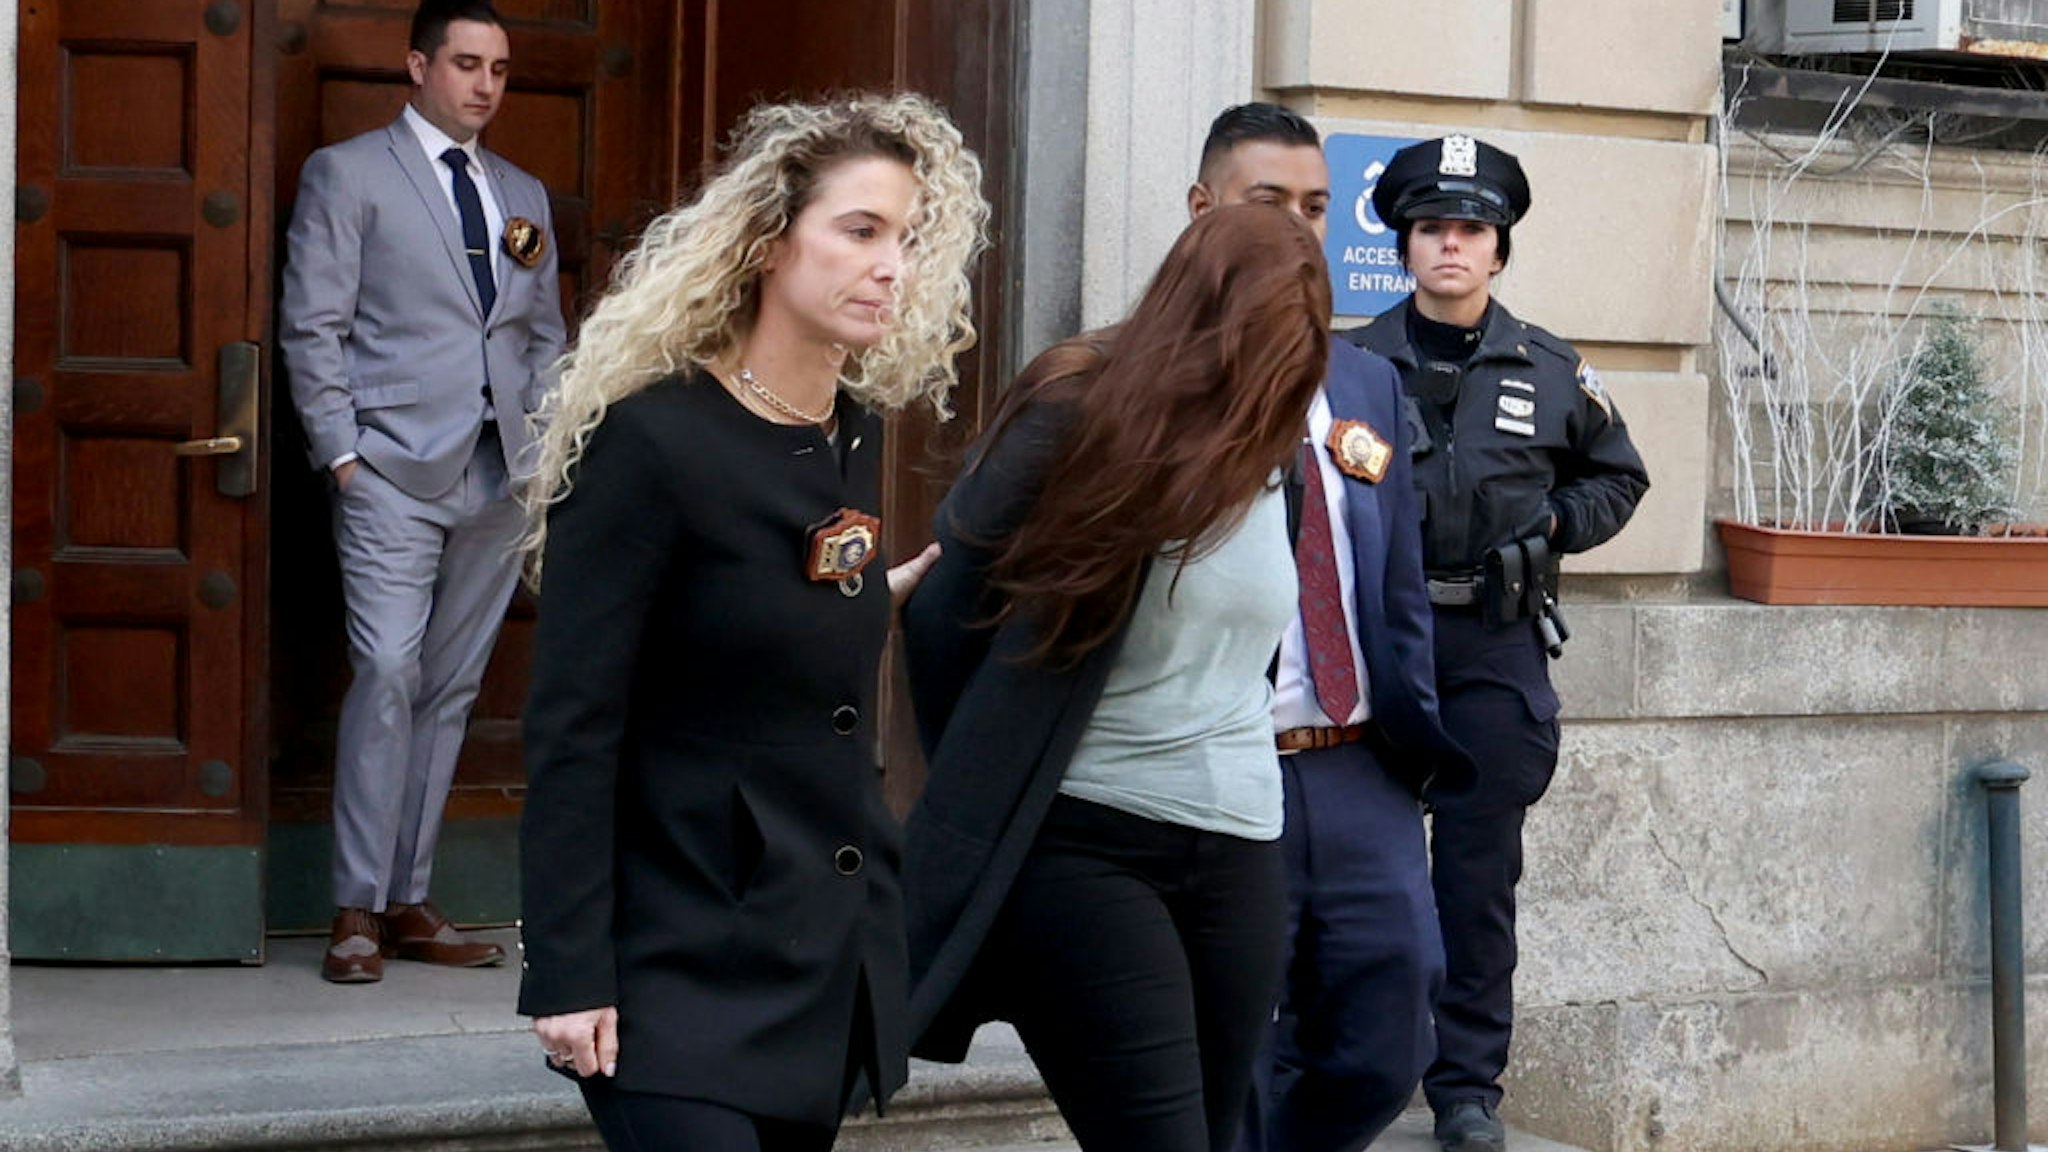 NYPD 10th Precinct Detectives walk 26 years old Lauren Pazienza to face Manslaughter charges for the shoving 87-year-old Lauren Maker Gustern.